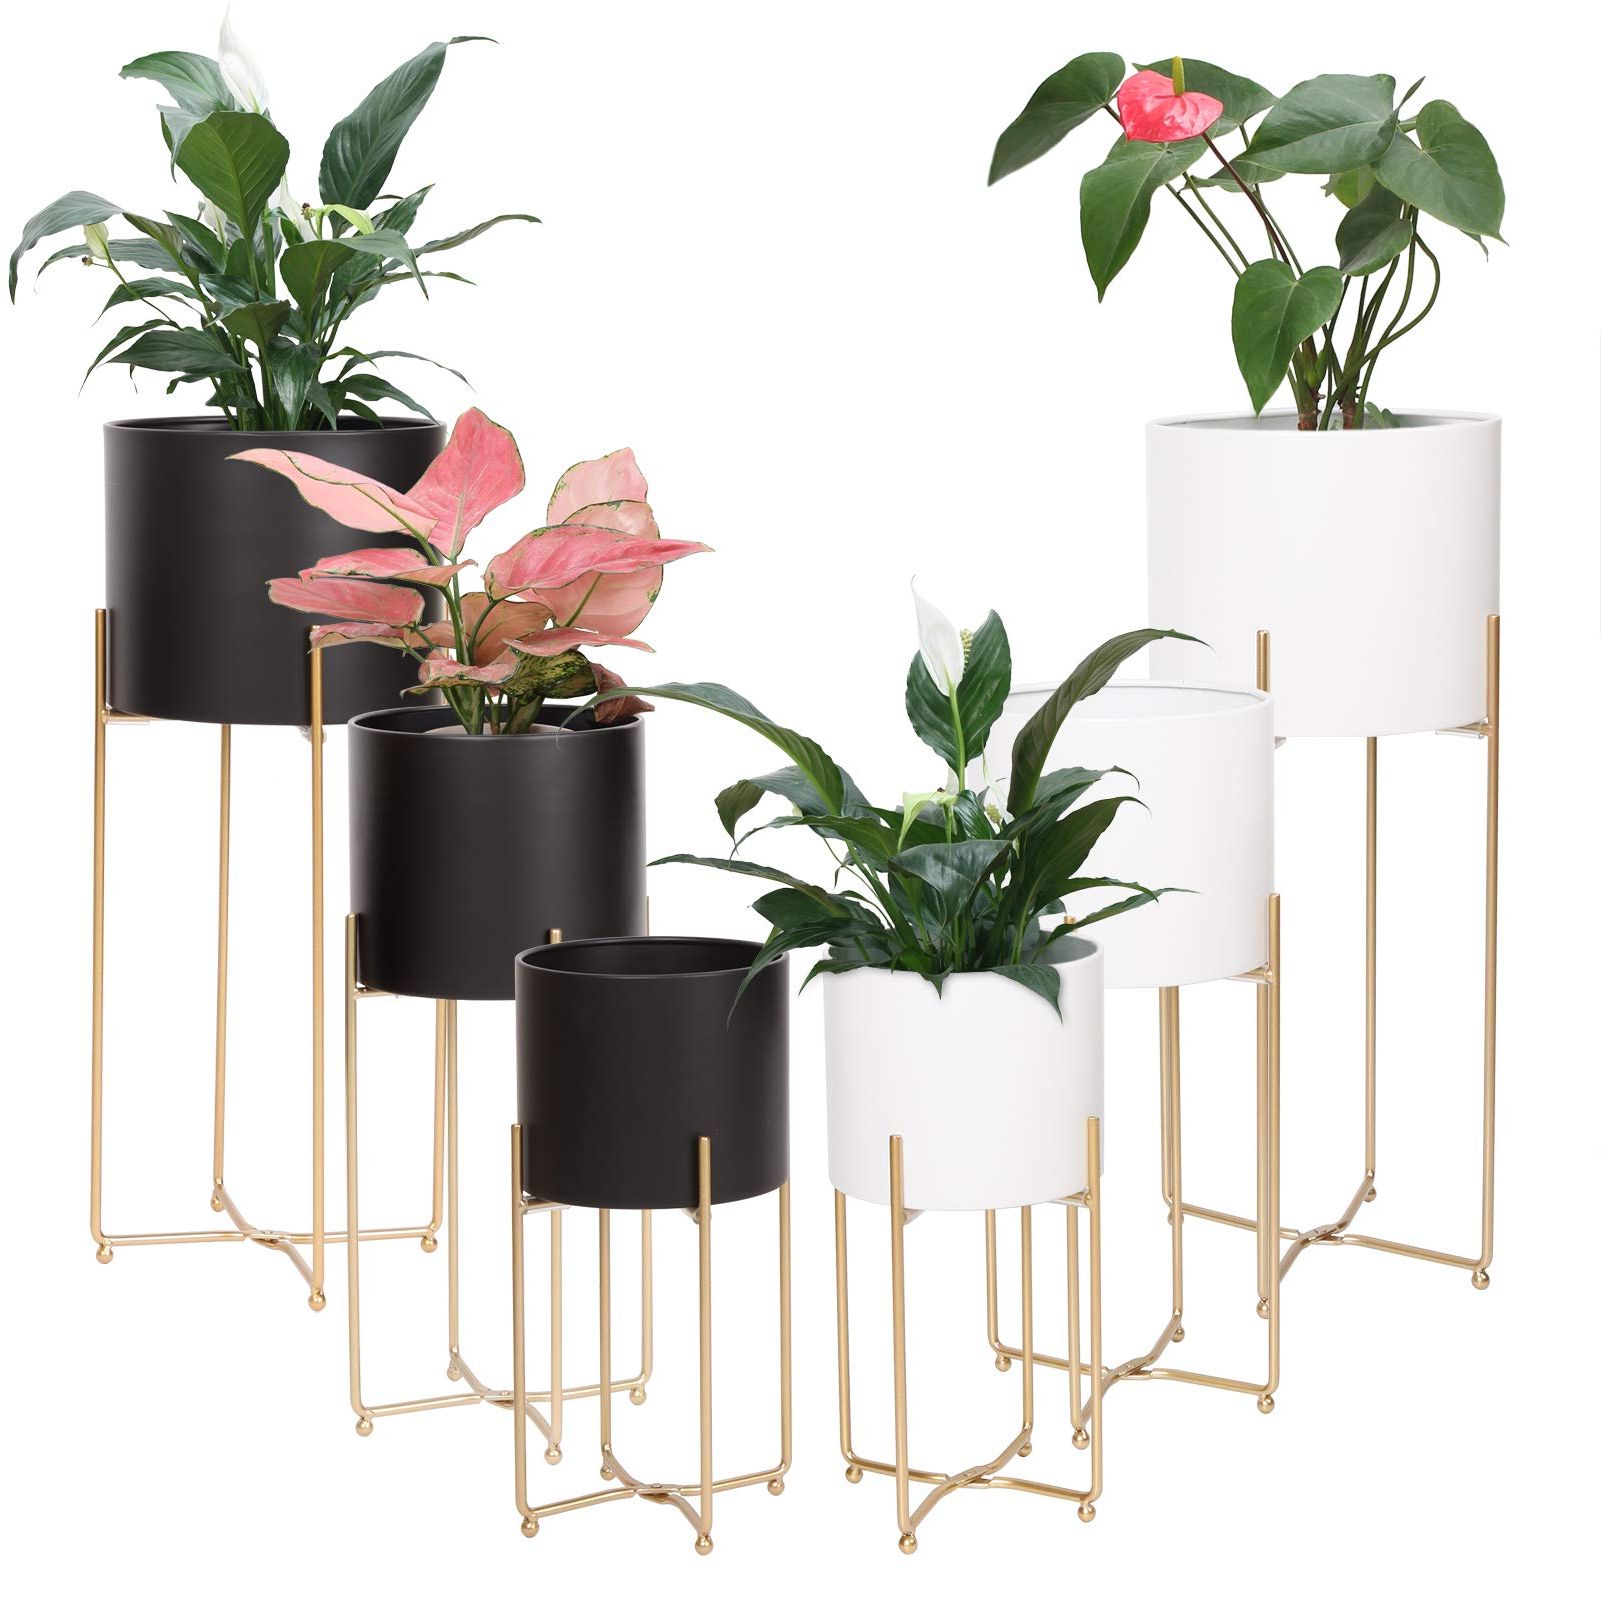 Widely Used Gold Plant Stands Throughout Ryosee Mid Century Planter With Gold Plant Stand, Black And White Pot With  Foldable Stand, Floor (View 7 of 15)